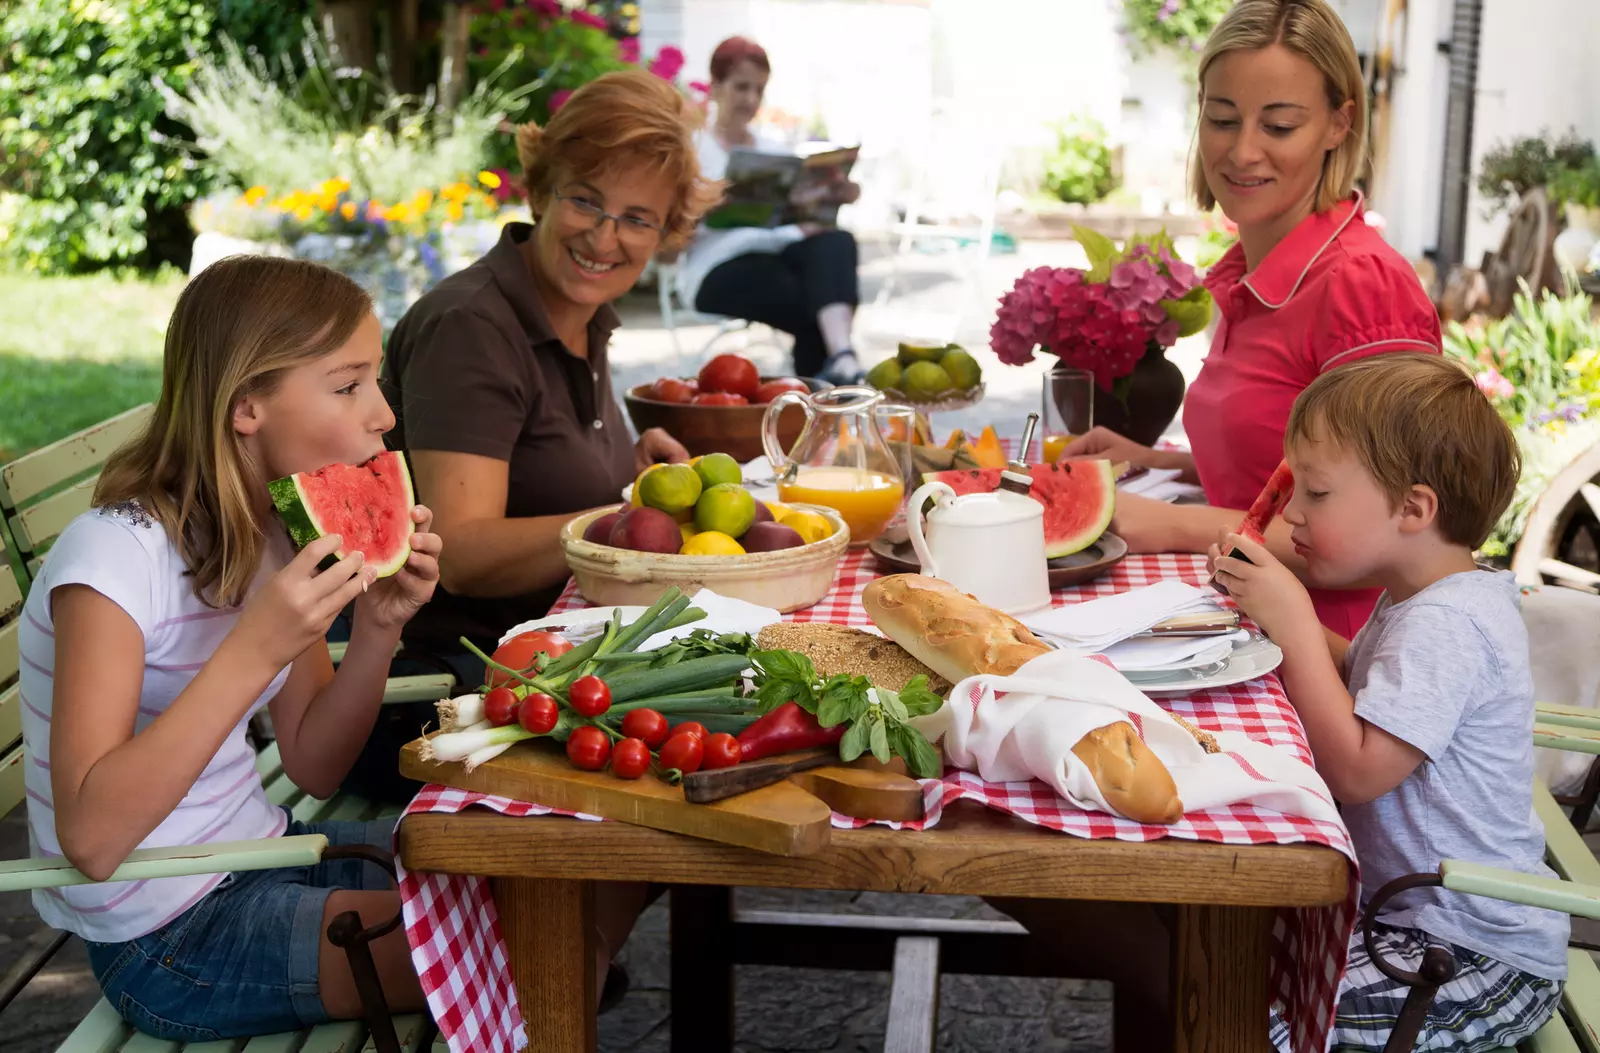 A family of four enjoys a summer picnic, outdoors, sitting at a picnic table enjoying summer foods.